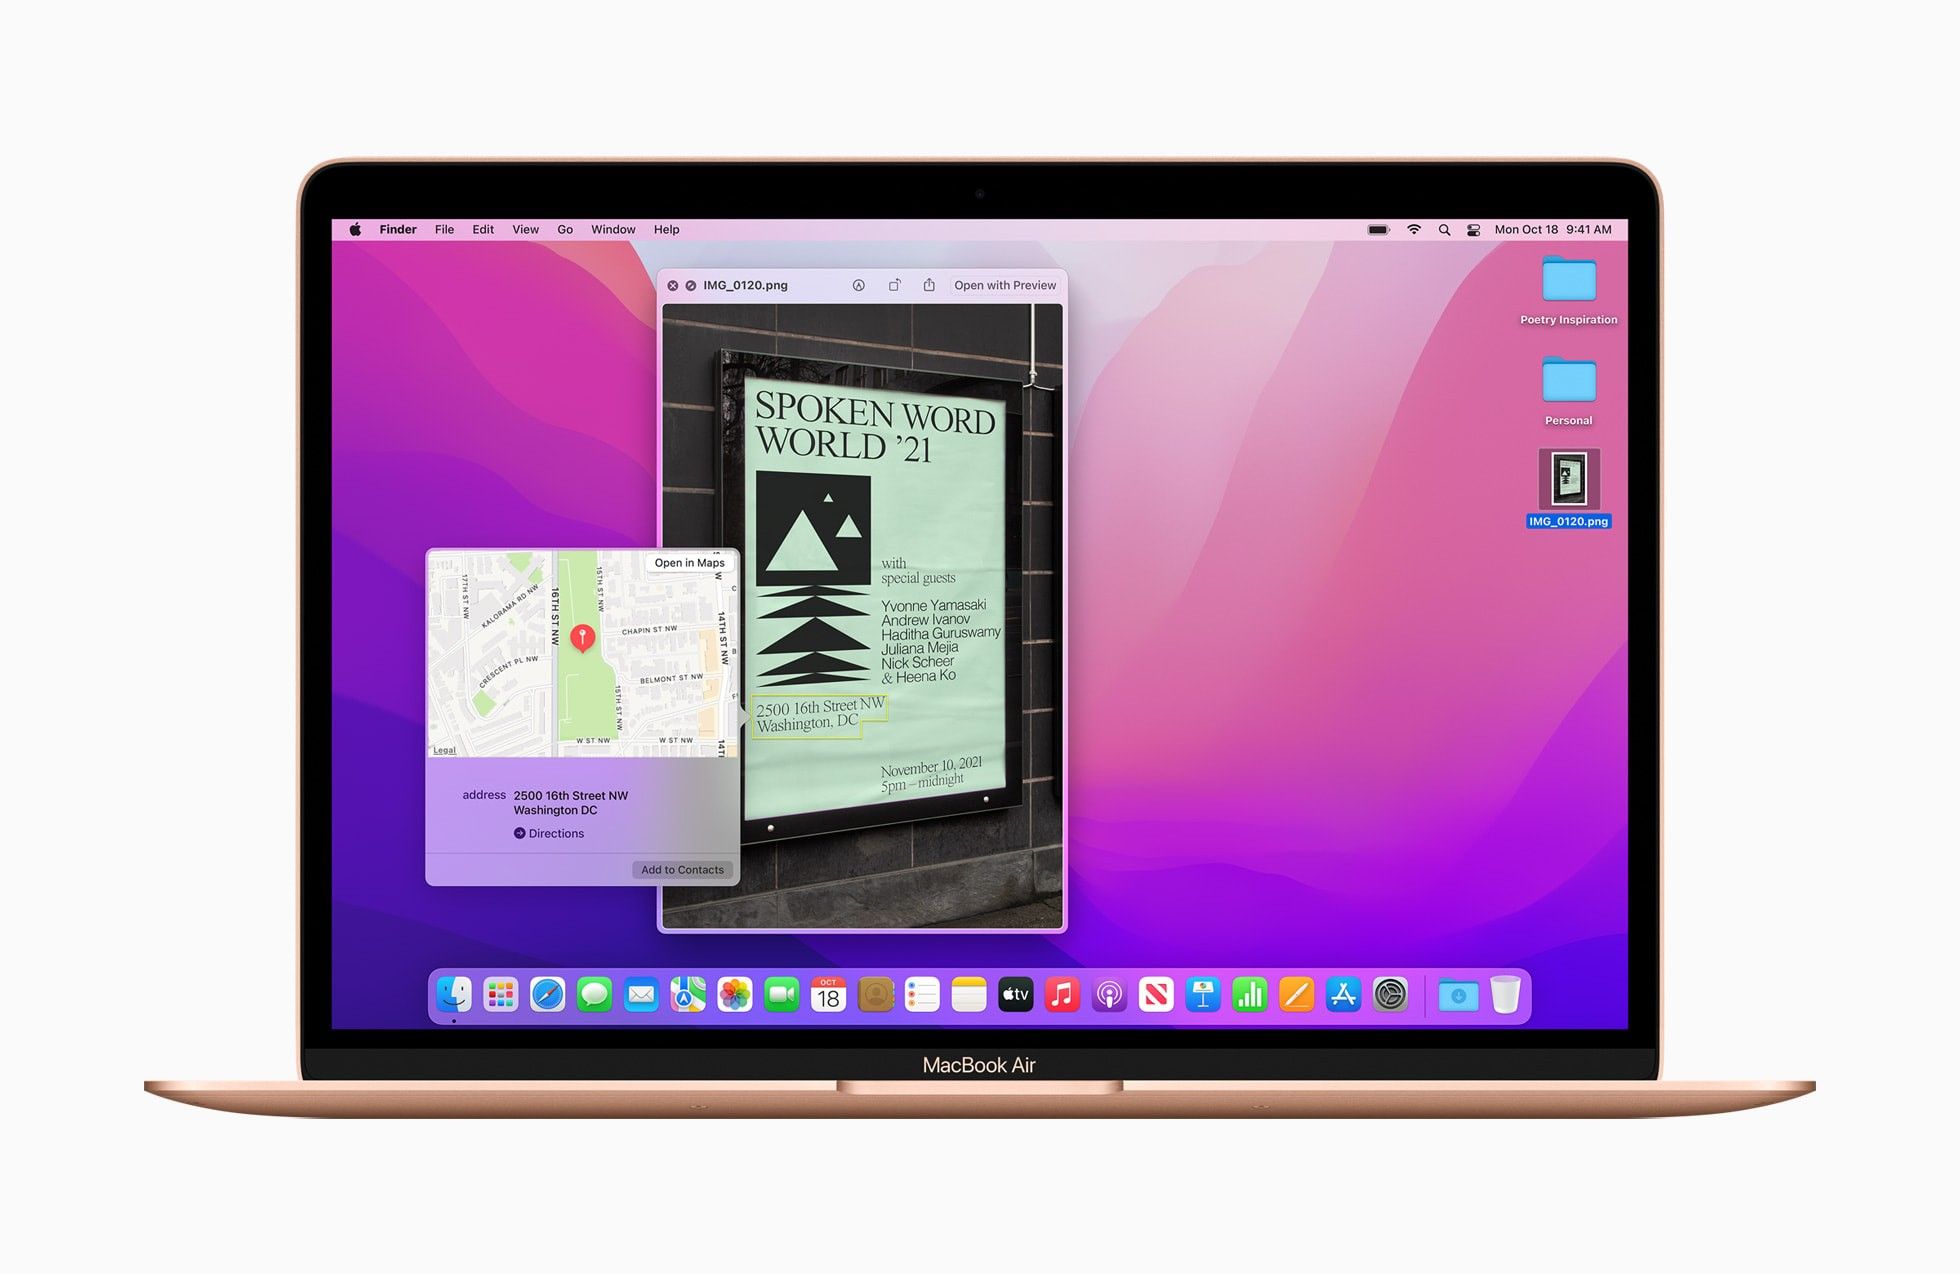 MacBook Air with macOS Monterey wallpaper. In the screen, a photo of an event poster and a window with the map to the venue, exemplifying how Live Text works on macOS Monterey.